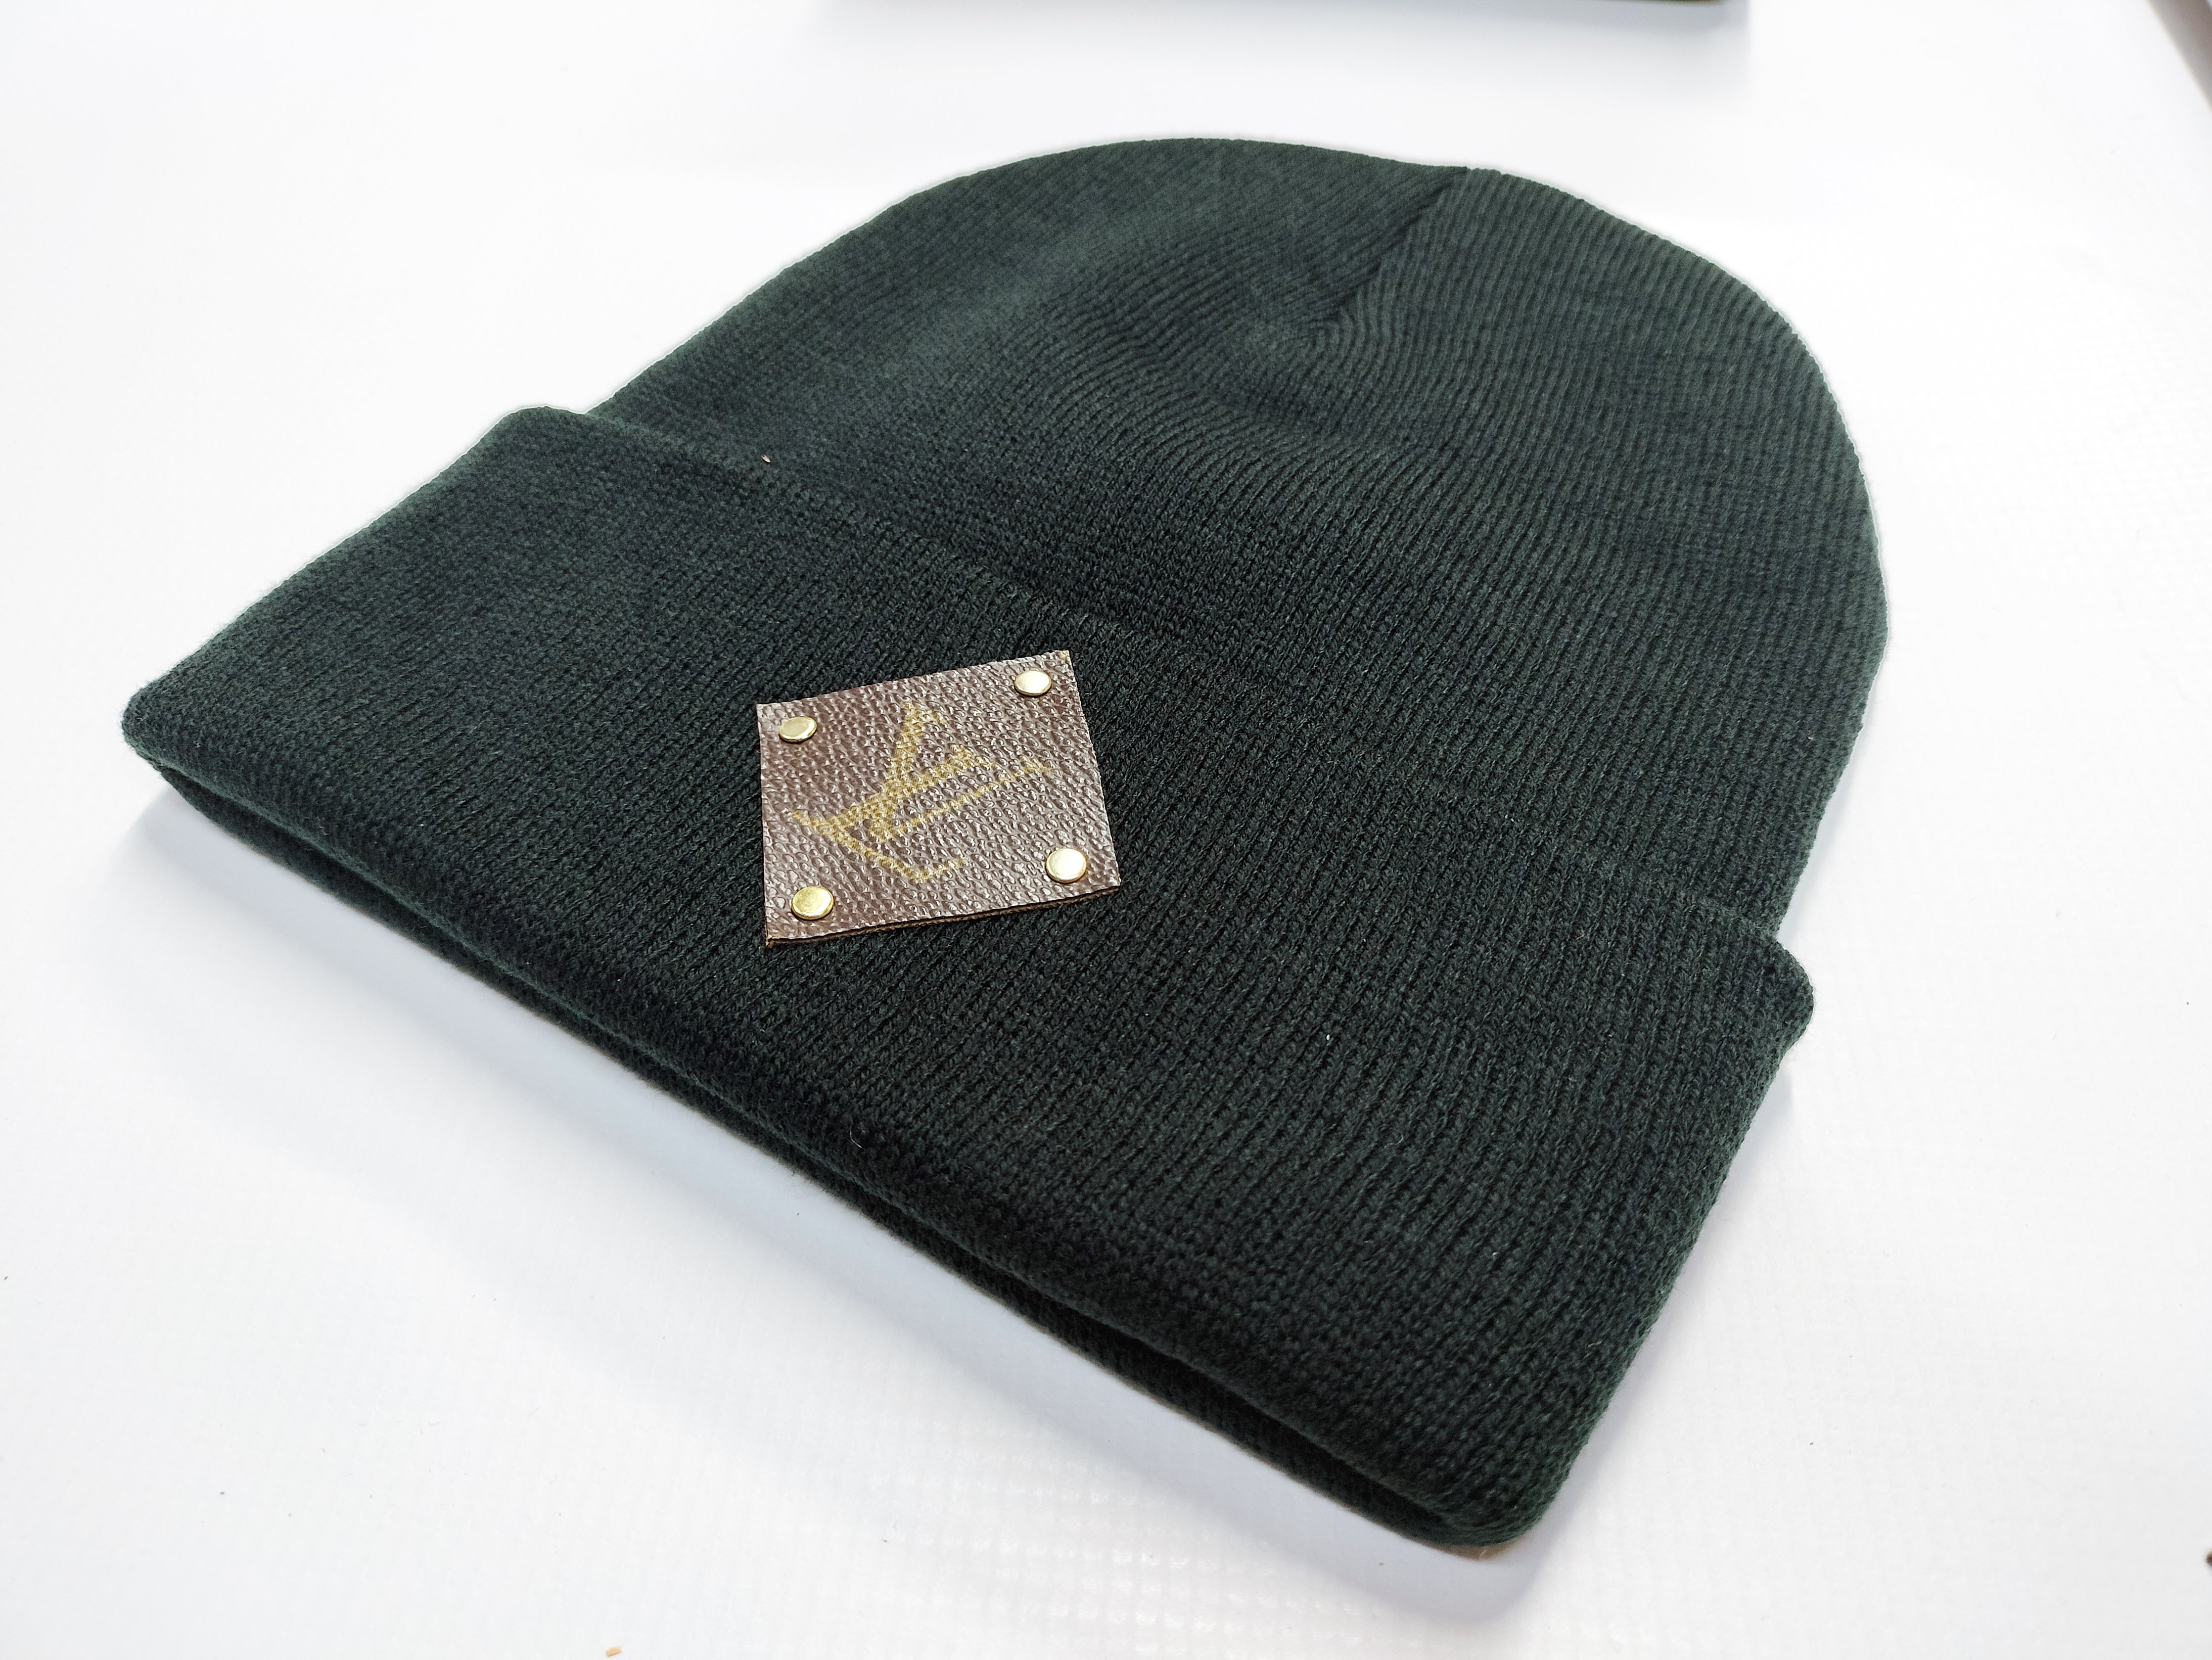 Navy LV Damier beanie available NOW! Click link in bio to purchase